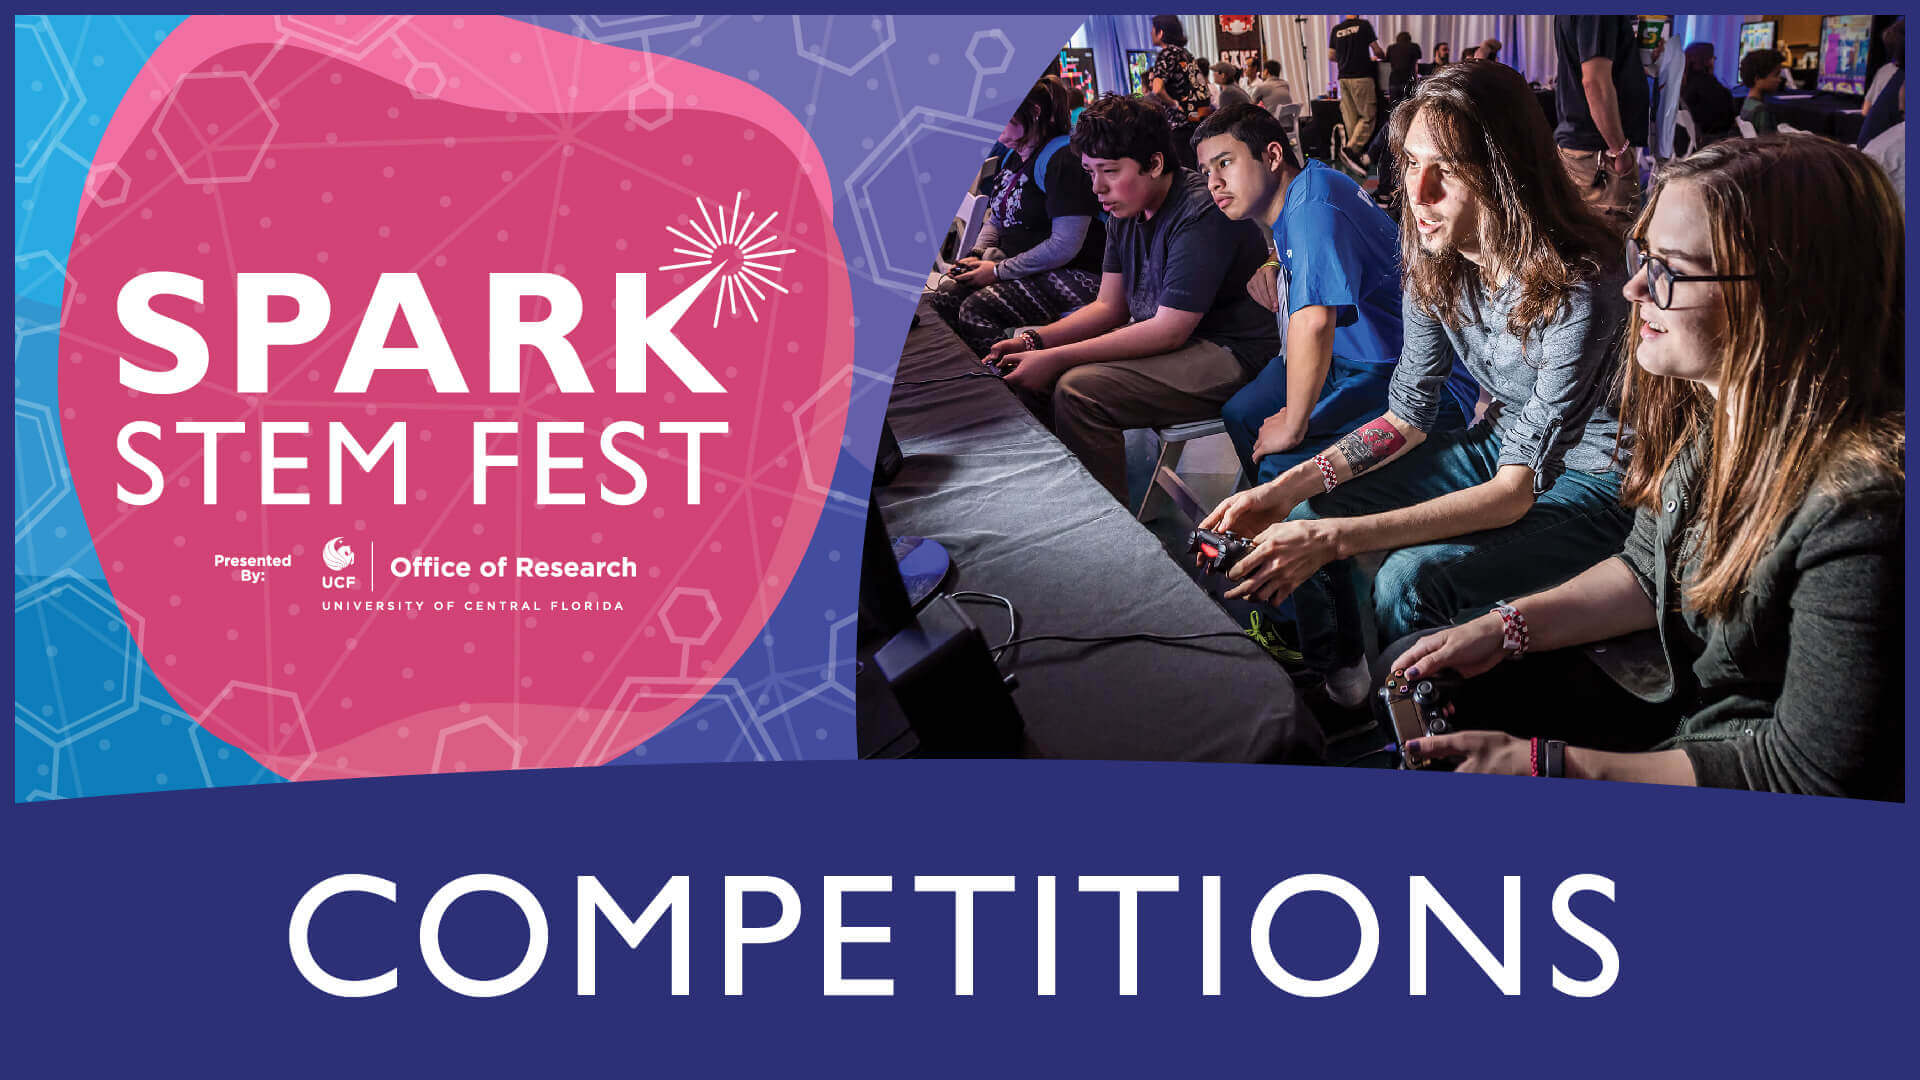 Competitions: Spark STEM Fest – Presented by UCF, Office of Research